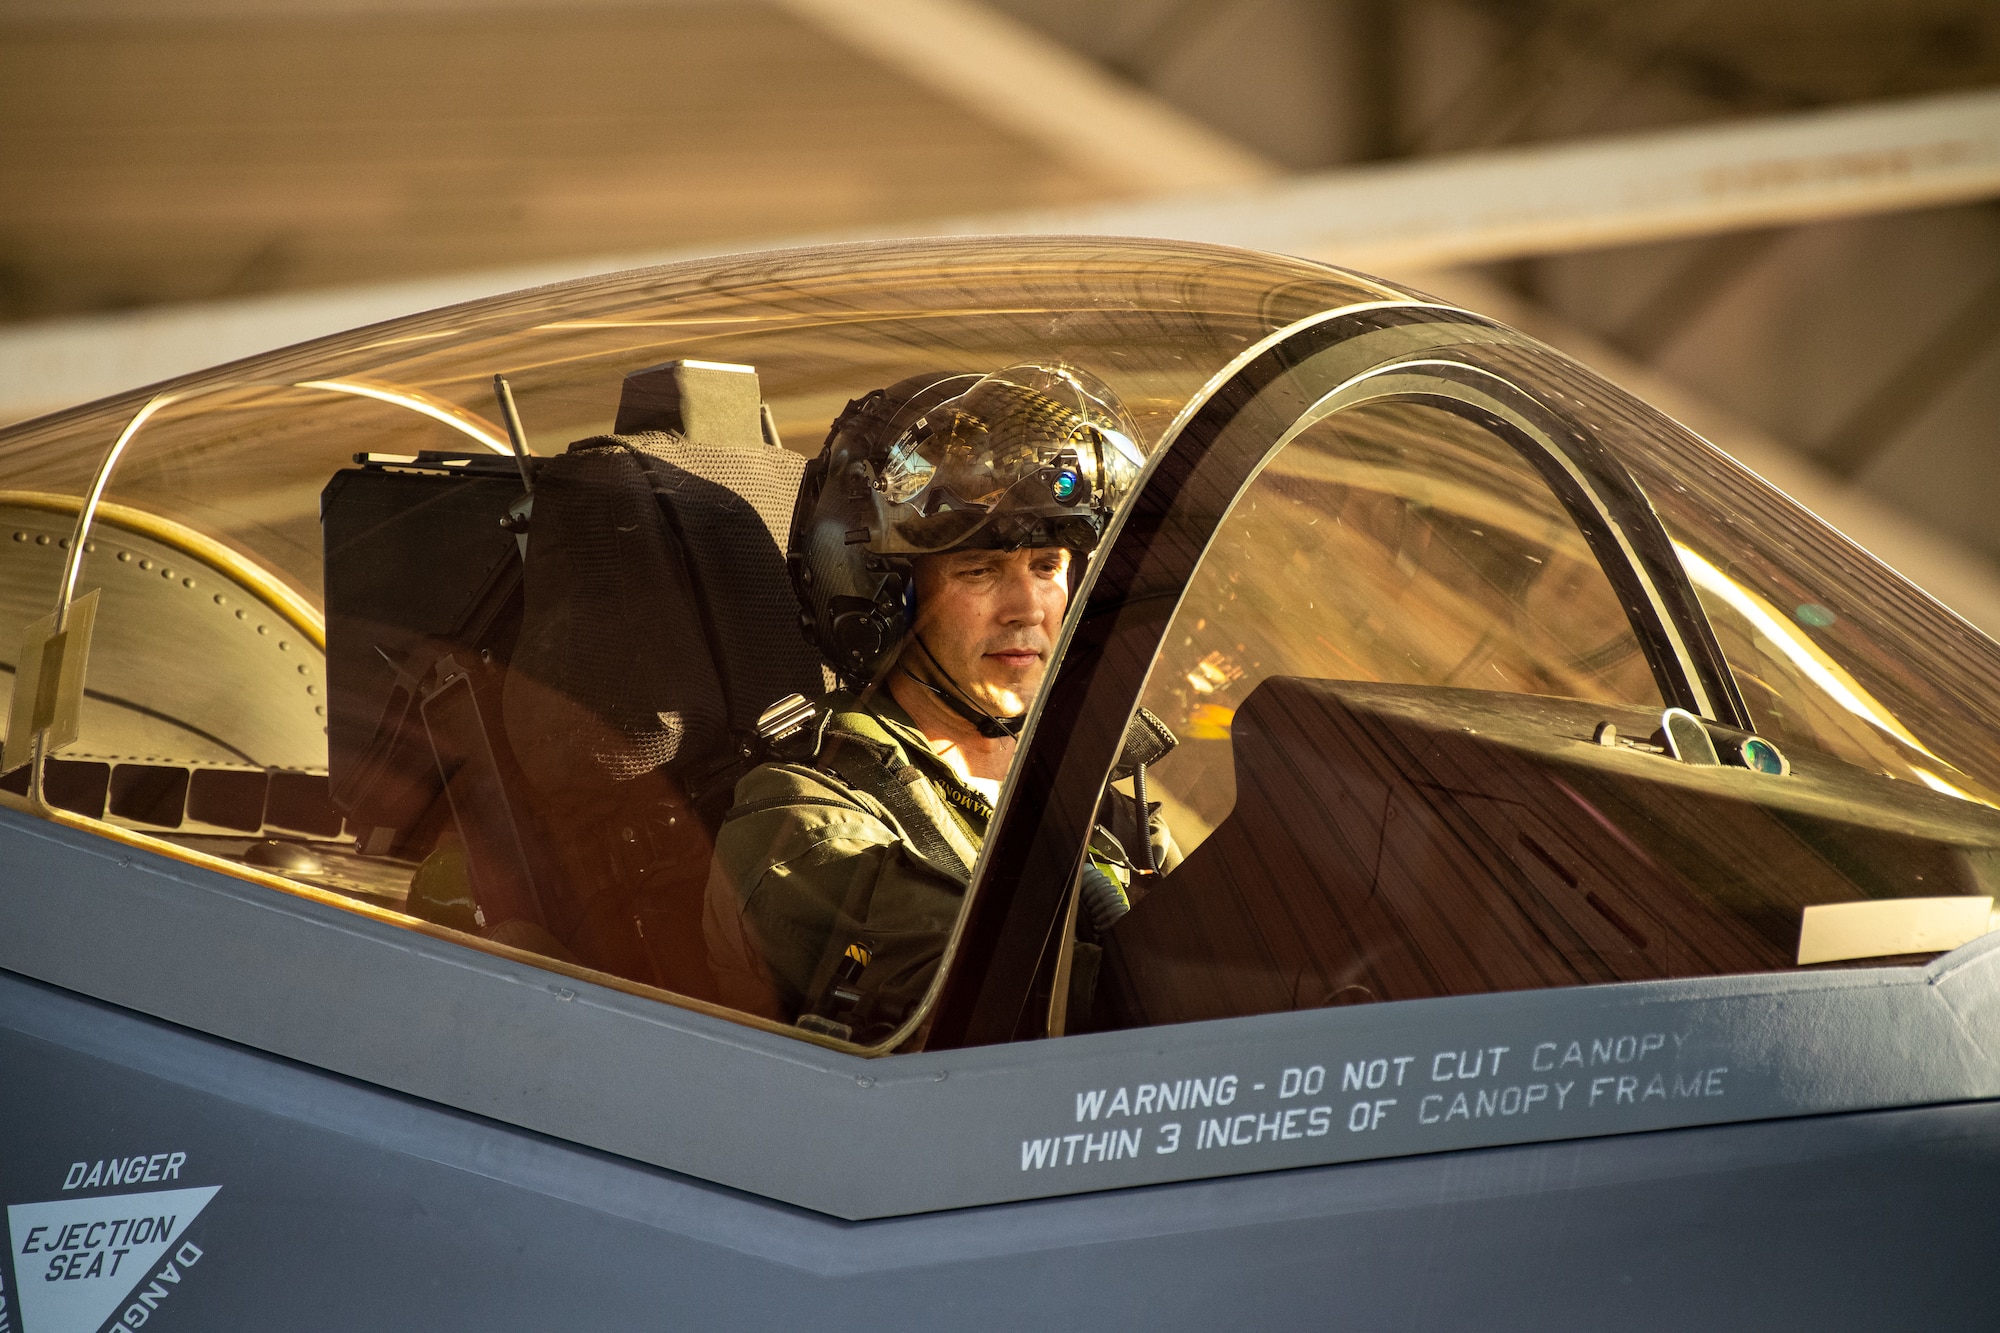 Lt. Col. Benjamin Harrison, 466th Fighter Squadron commander, performs pre-flight actions in an F-35A prior to take off from Hill Air Force Base, Utah, the evening of Aug. 20, 2019, as the active duty 388th and reserve 419th Fighter Wings conducted local night flying operations. The wings are required to train at night to maintain their readiness and all-weather capabilities. Increased flying also provides a valuable opportunity to evaluate aircraft maintenance resiliency and operational agility. (U.S. Air Force photo by R. Nial Bradshaw)